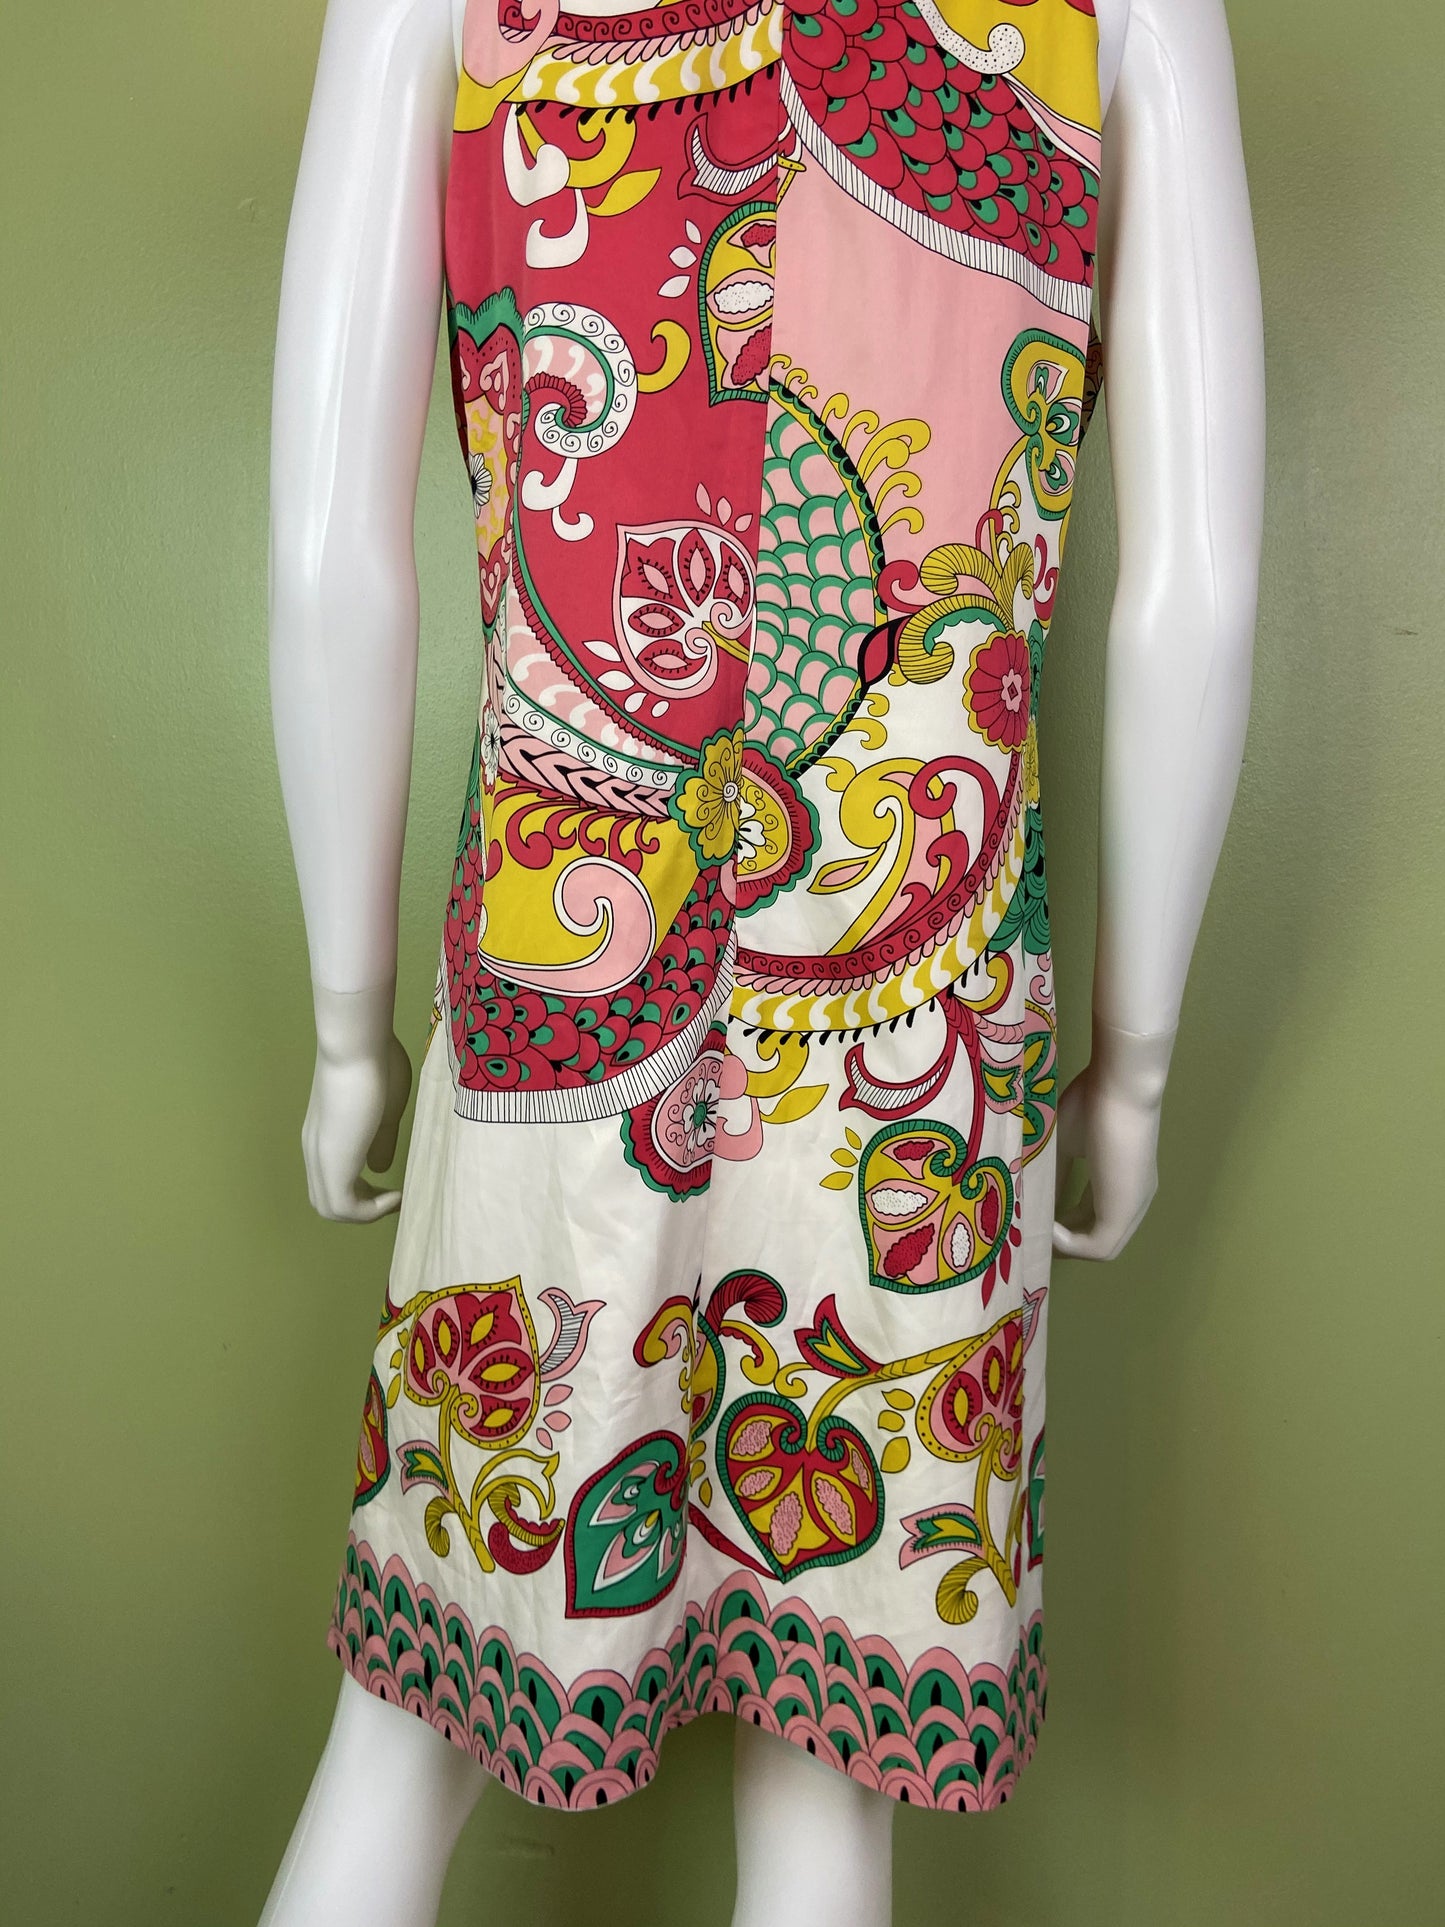 Nicole Miller Bejeweled Graphic Pink Green Silky Sheath Dress